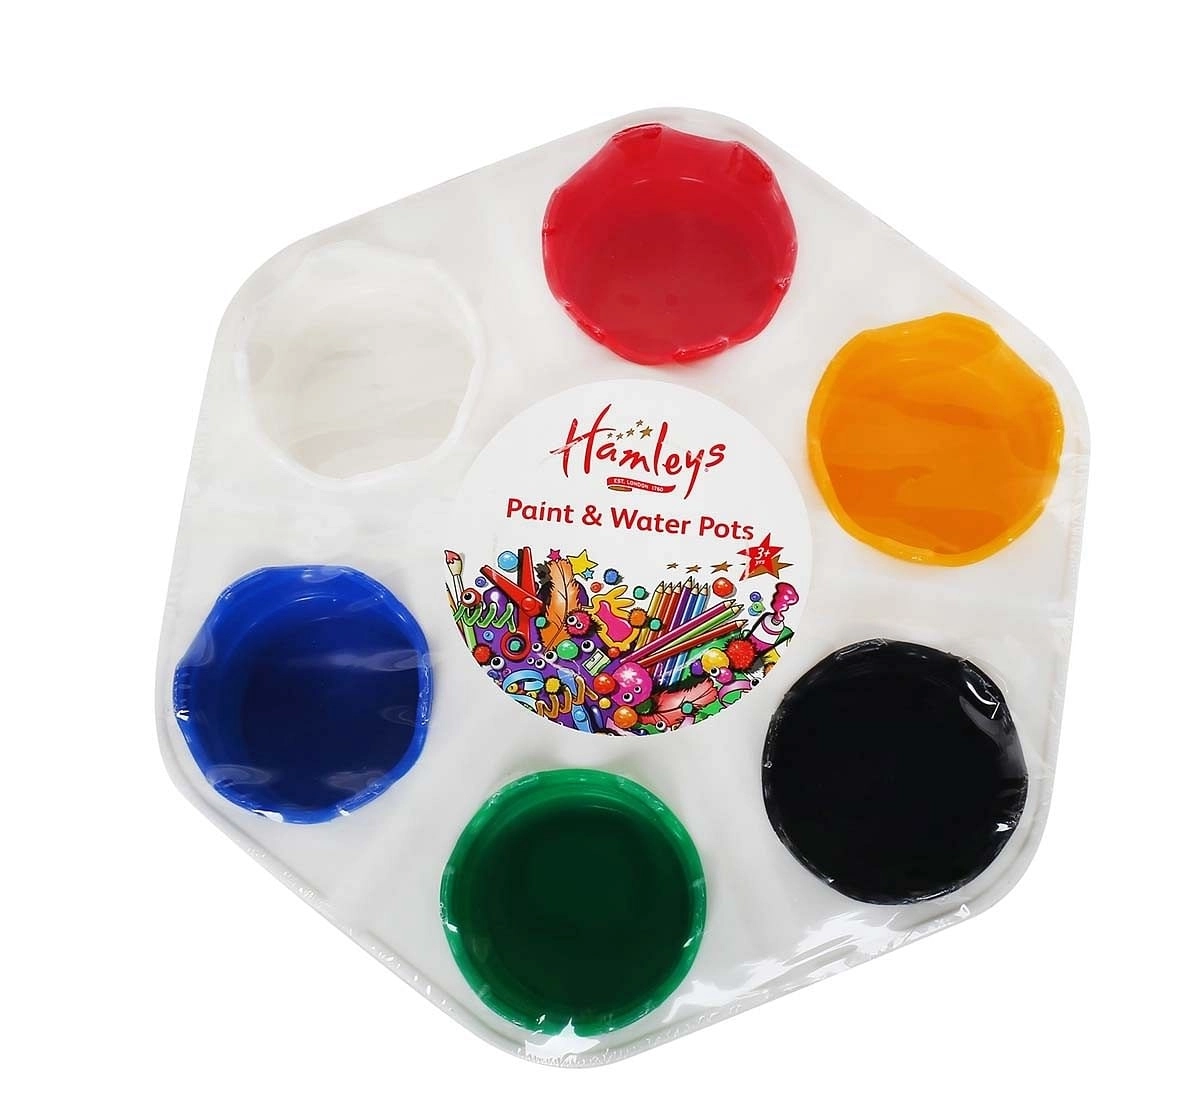 Hamleys Paint and Water Pots, Multi Coloured School Stationary for Kids age 3Y+ 